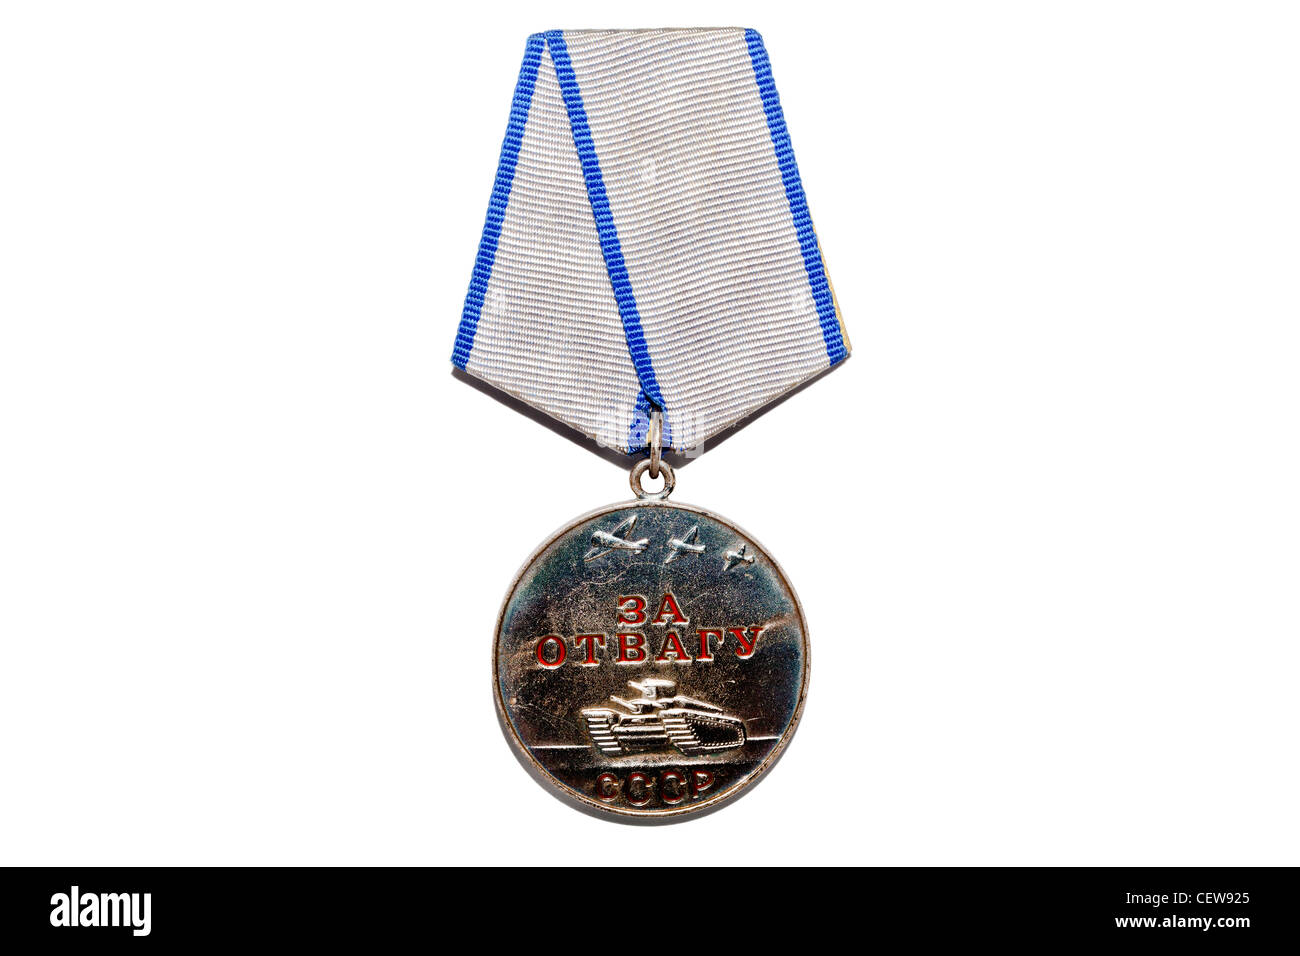 The medal "For courage" Stock Photo